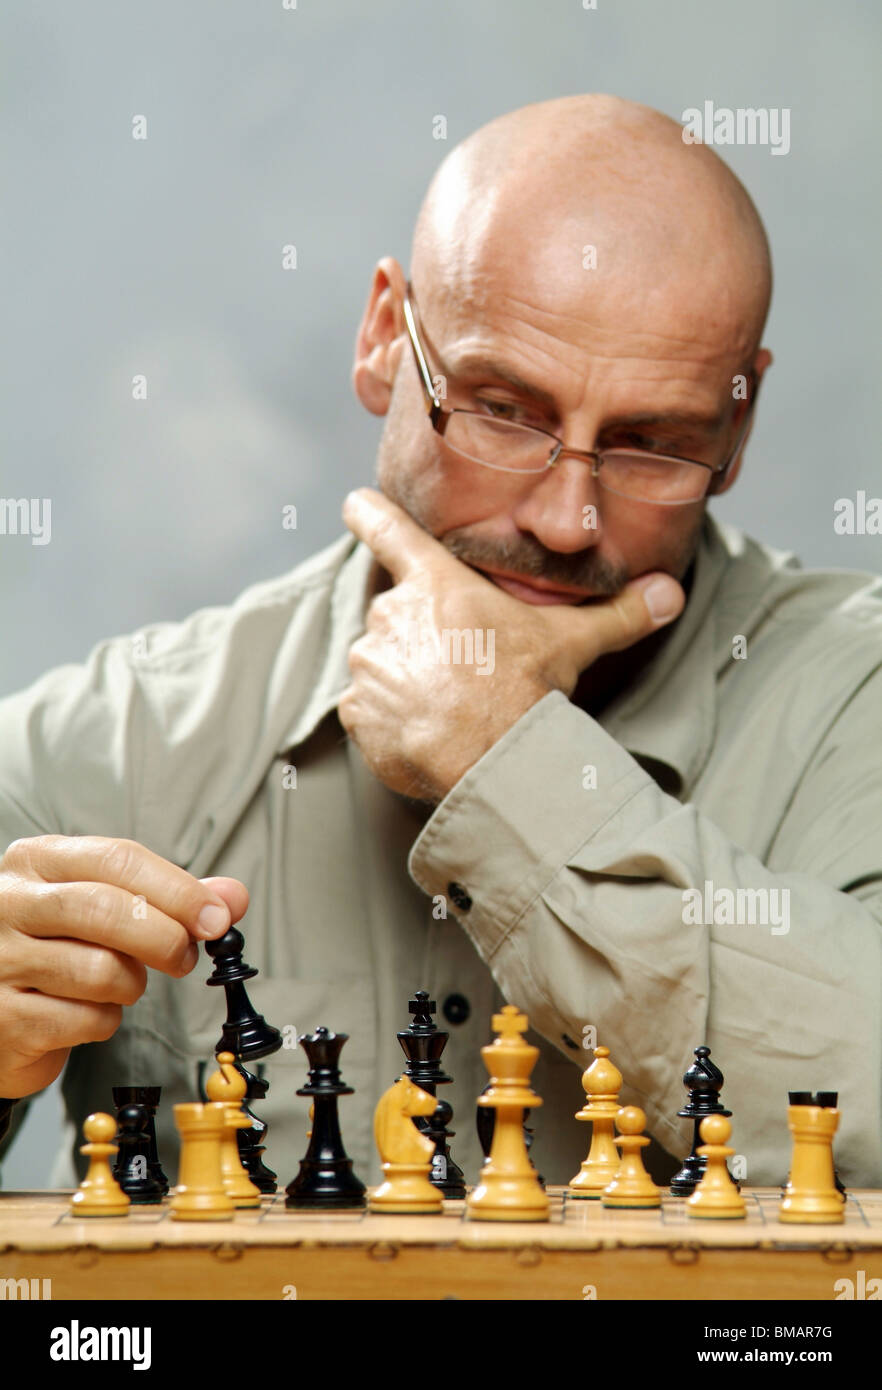 A chess player Stock Photo